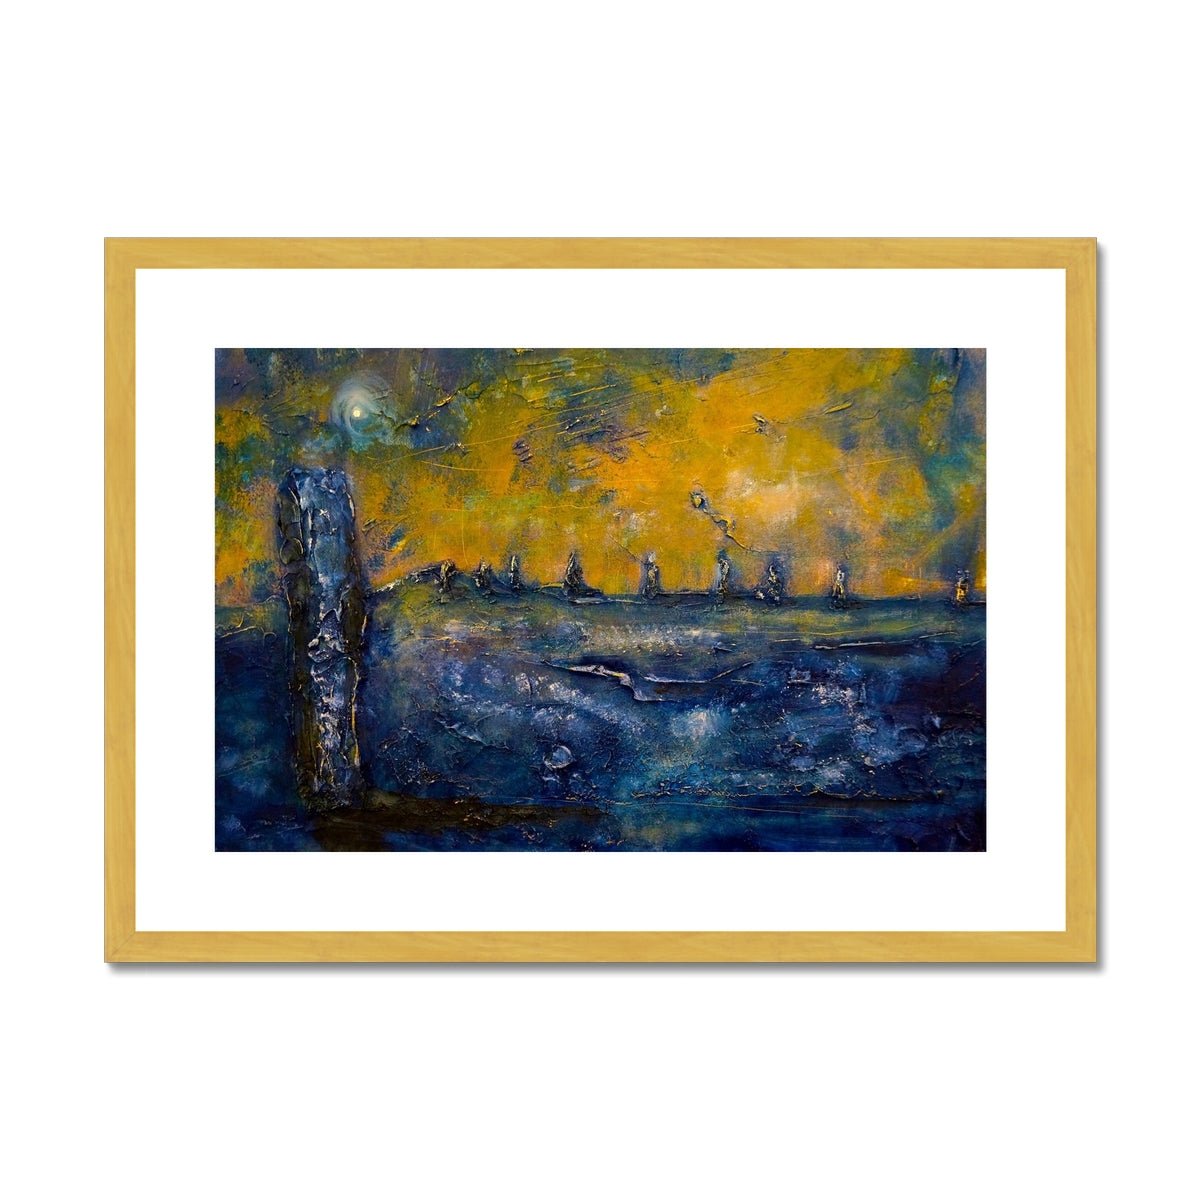 Brodgar Moonlight Orkney Painting | Antique Framed & Mounted Prints From Scotland-Antique Framed & Mounted Prints-Orkney Art Gallery-A2 Landscape-Gold Frame-Paintings, Prints, Homeware, Art Gifts From Scotland By Scottish Artist Kevin Hunter